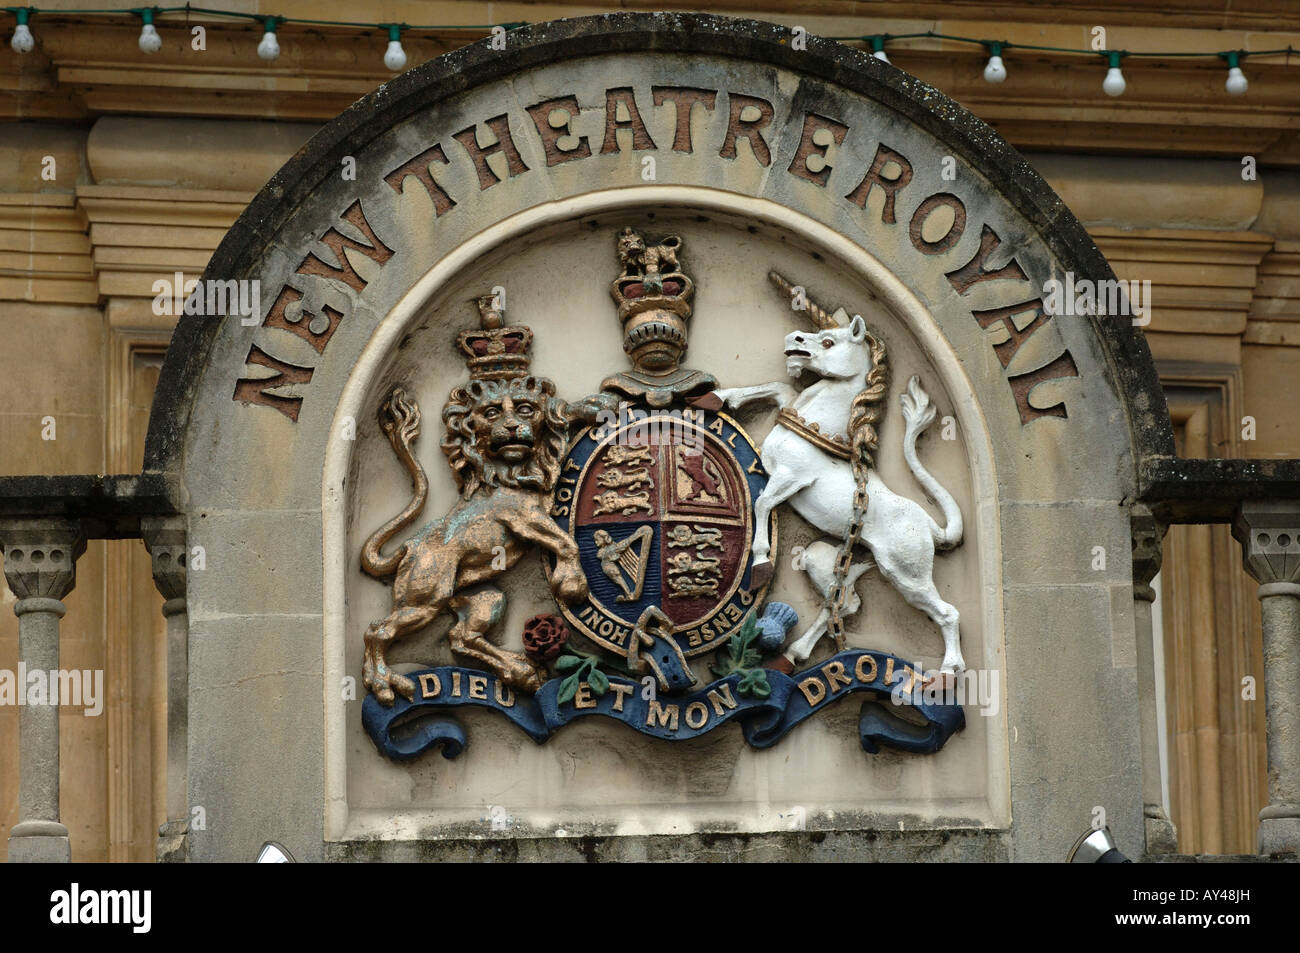 Bath new theatre royal coat of arms Stock Photo